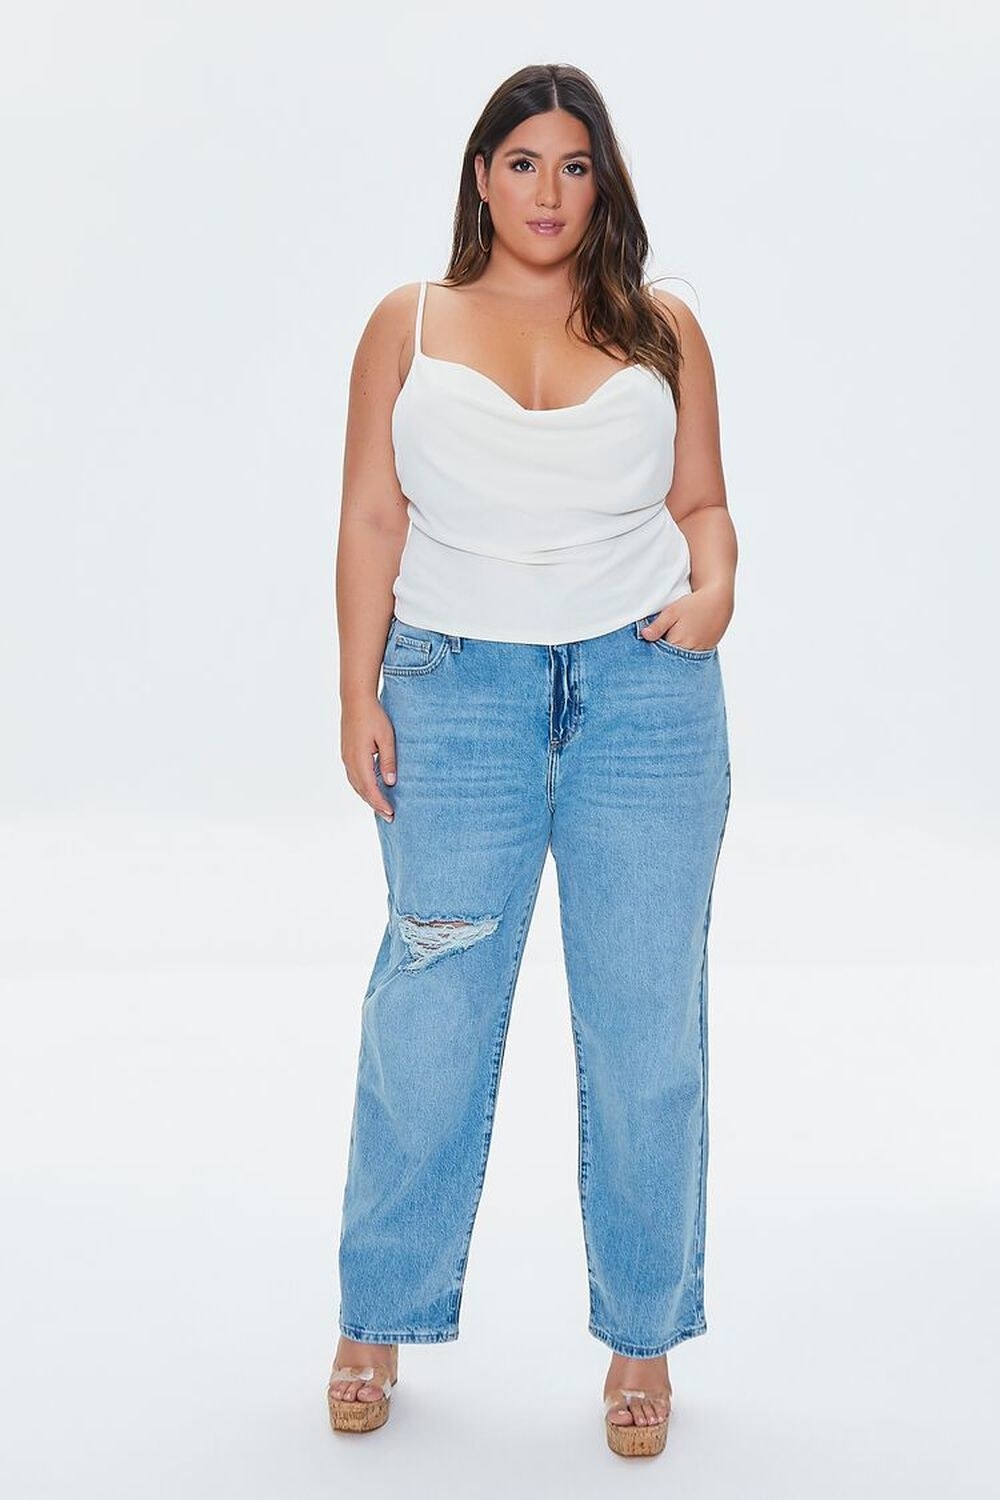 Model wearing the baggy-style jeans